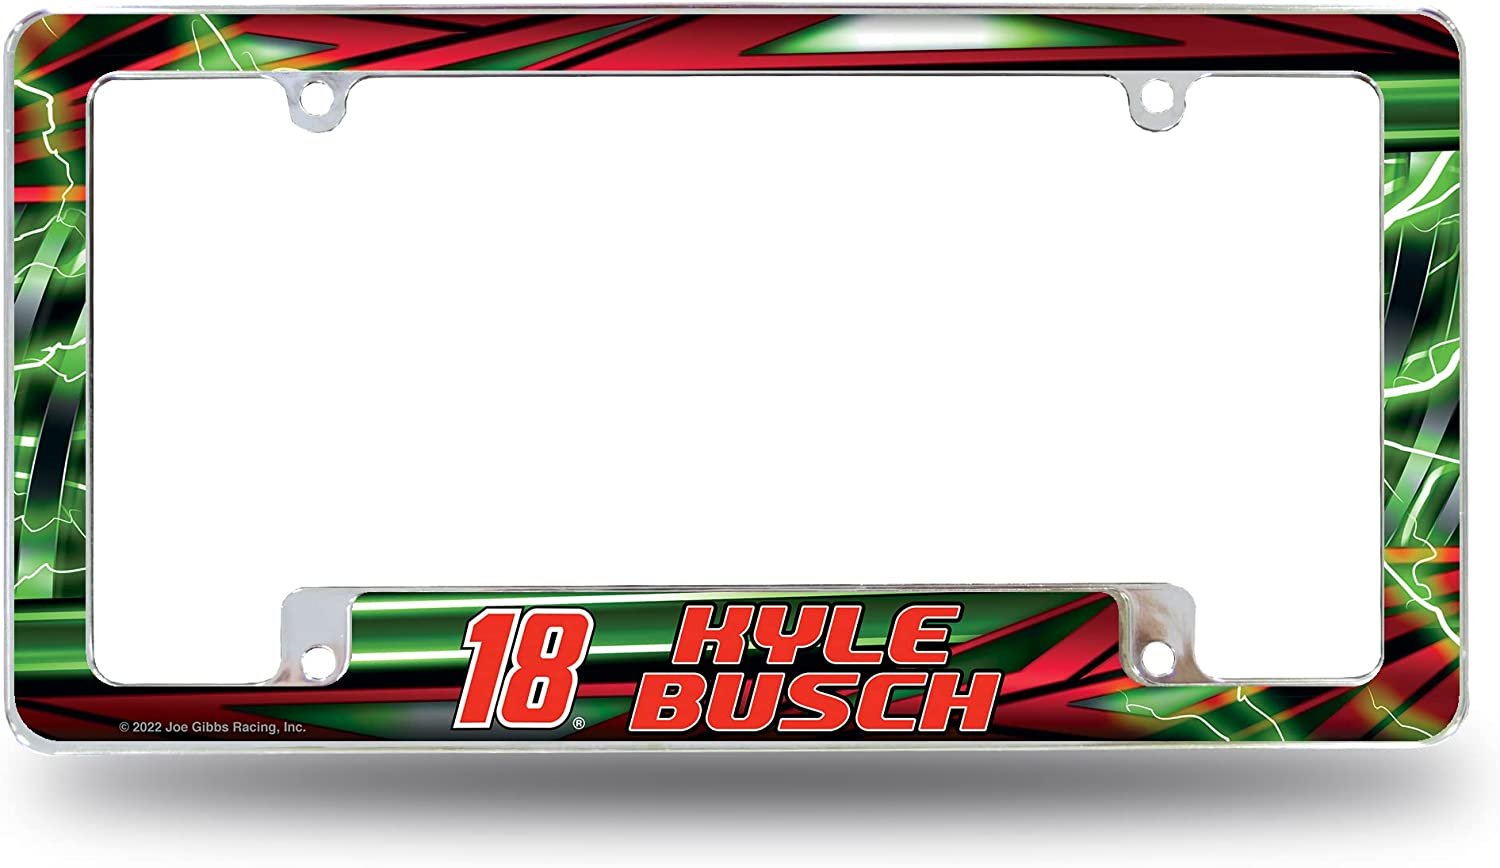 Kyle Busch #18 Metal License Plate Frame Chrome Tag Cover All Over Design 6x12 Inch Nascar